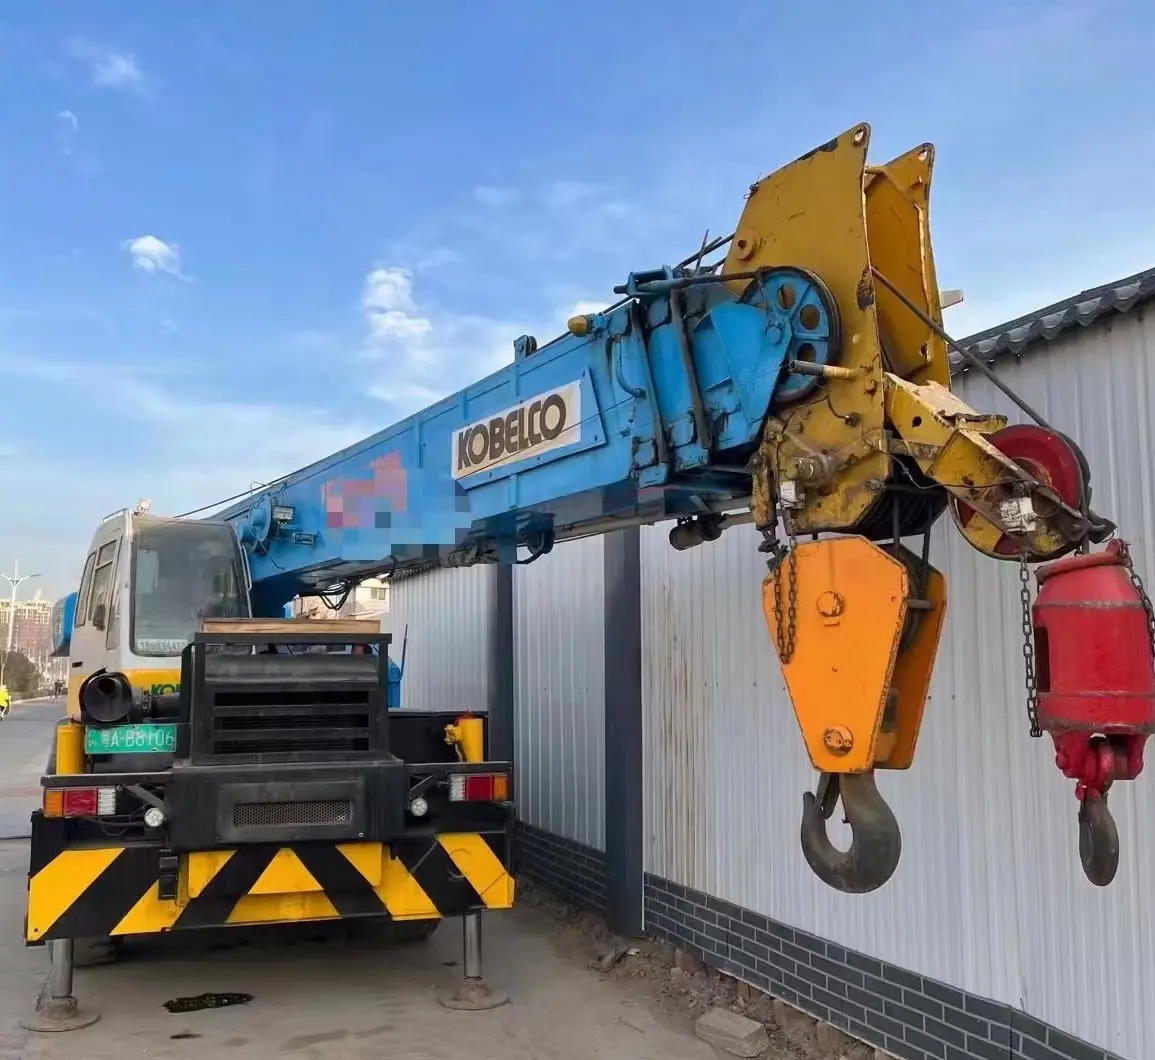 KOBELCO 25 TONS used LORRY-MOUNTED CRANE HOT SALE,New arrival KOBELCO 25T used DFF-ROAD Crane For sale,USED KOBELCO 25T 50T 100T